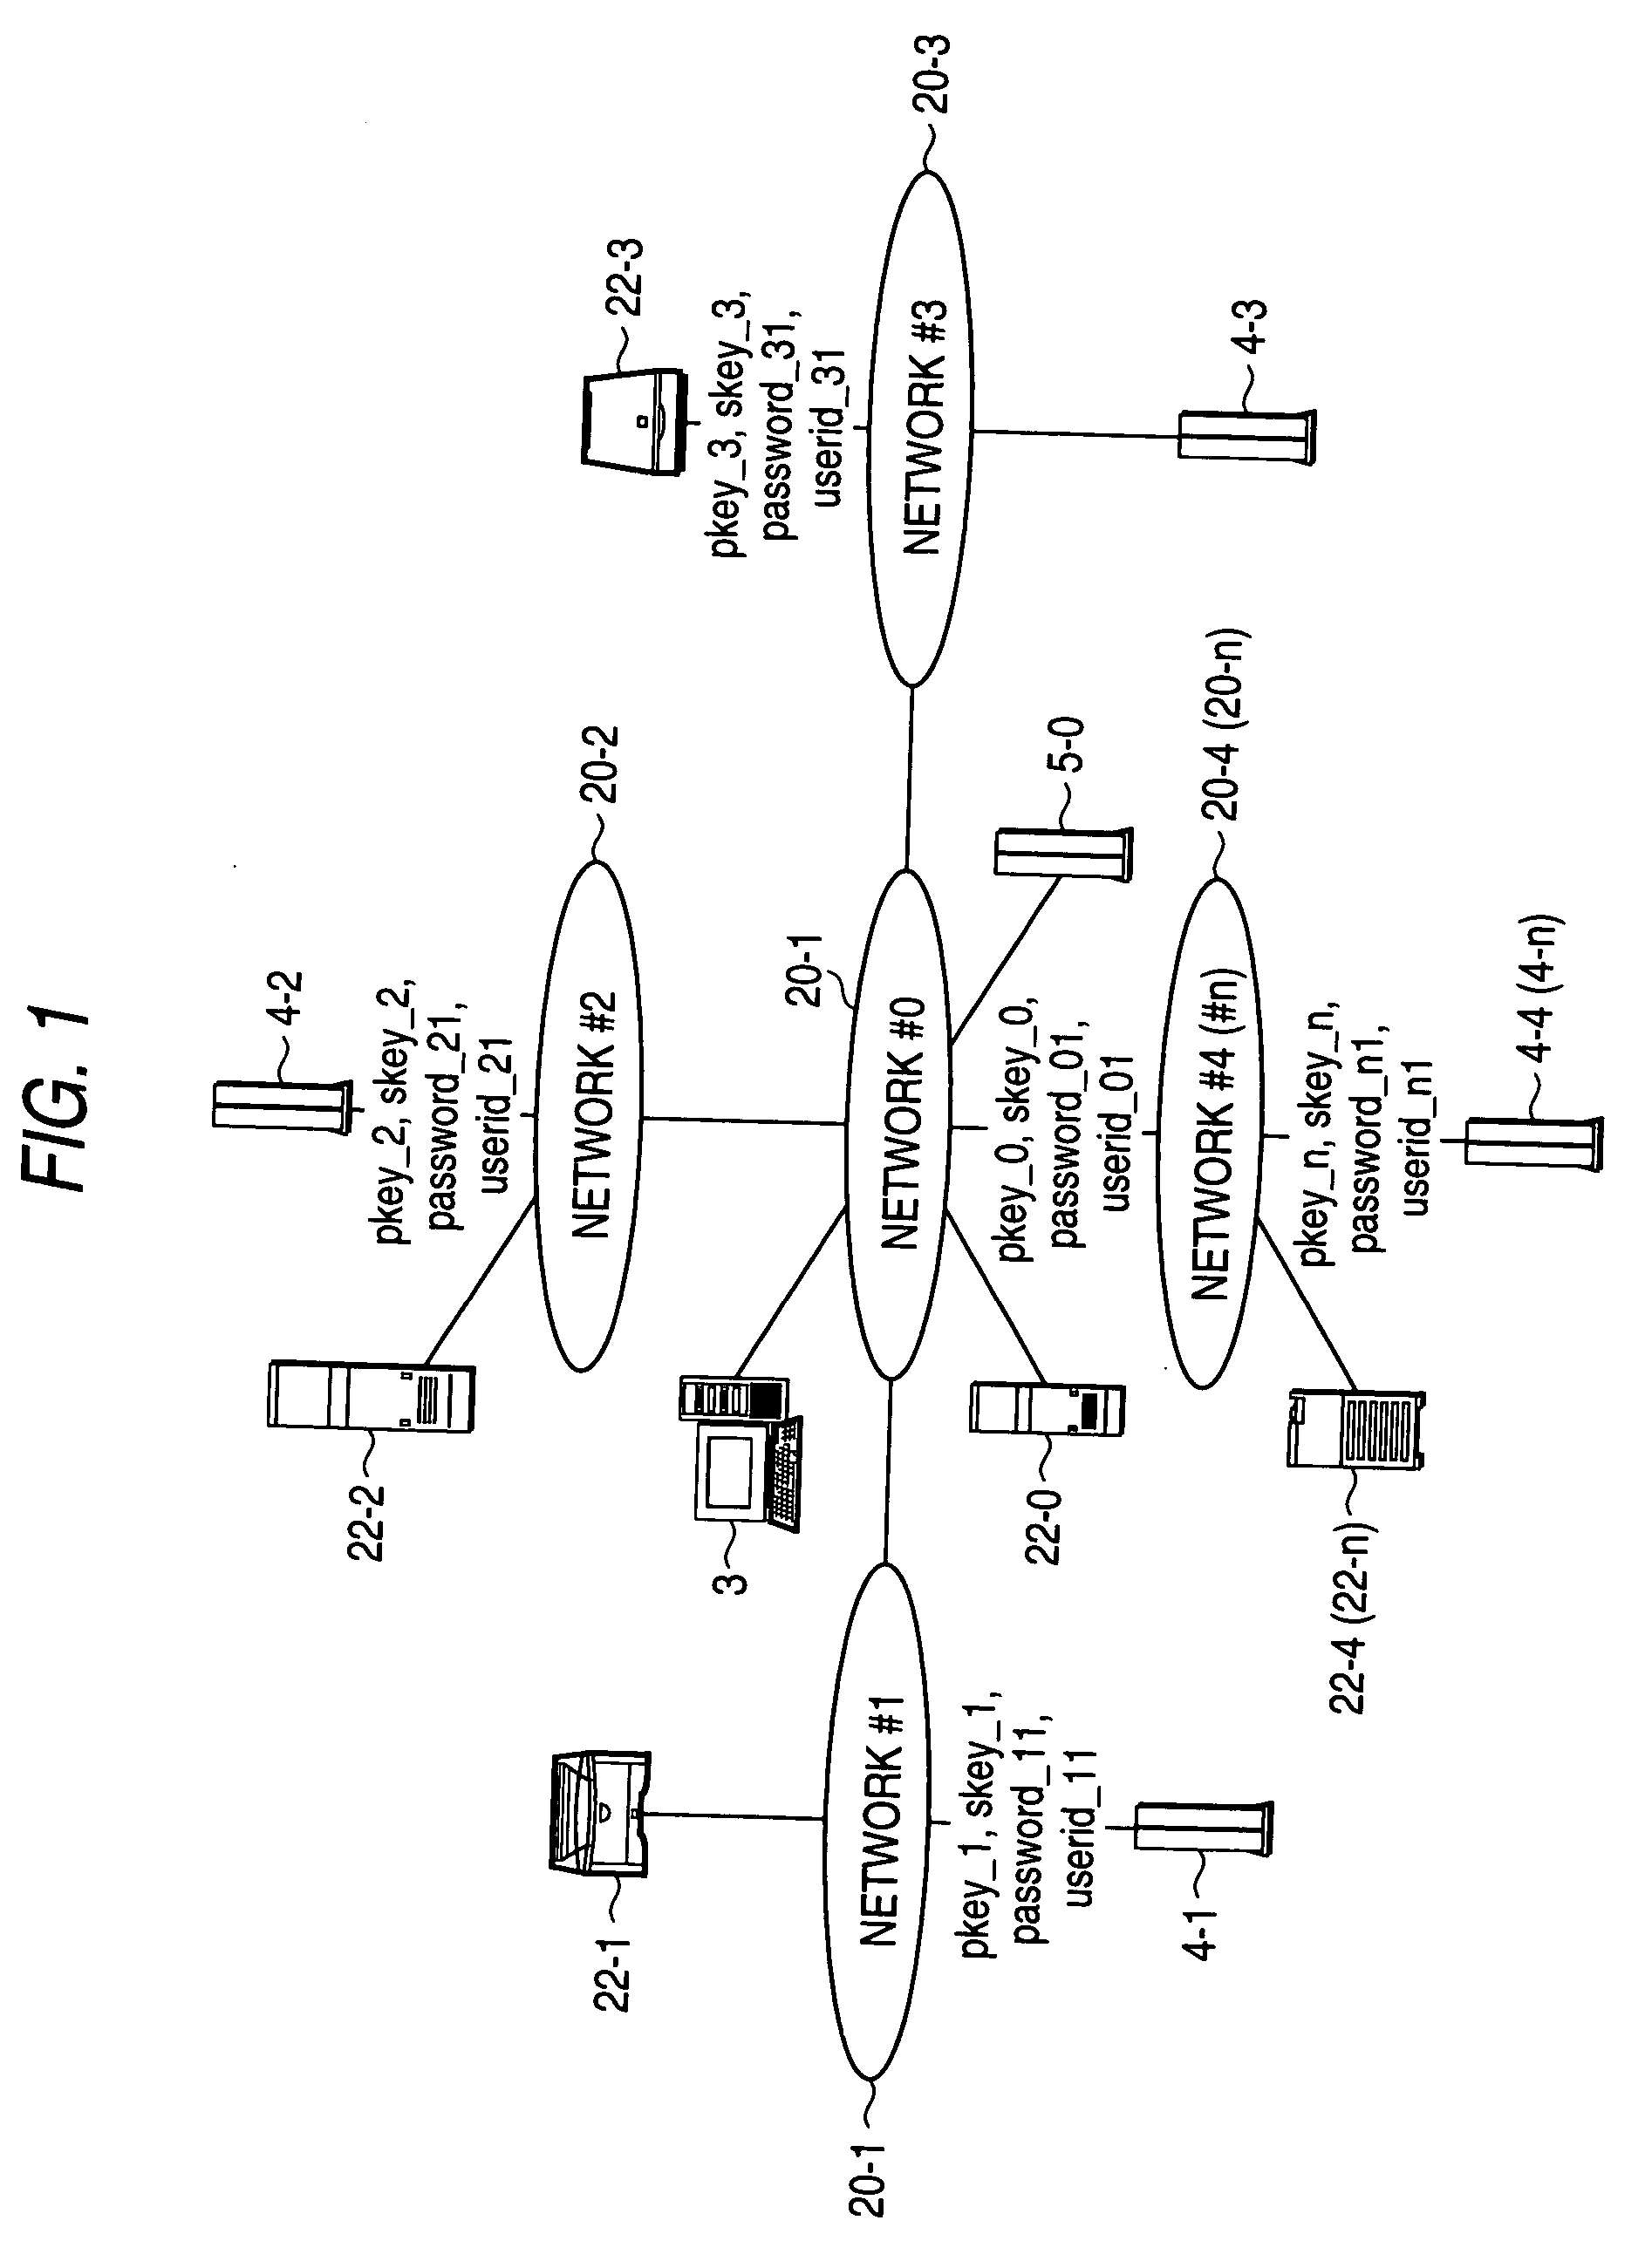 Client server system and devices thereof